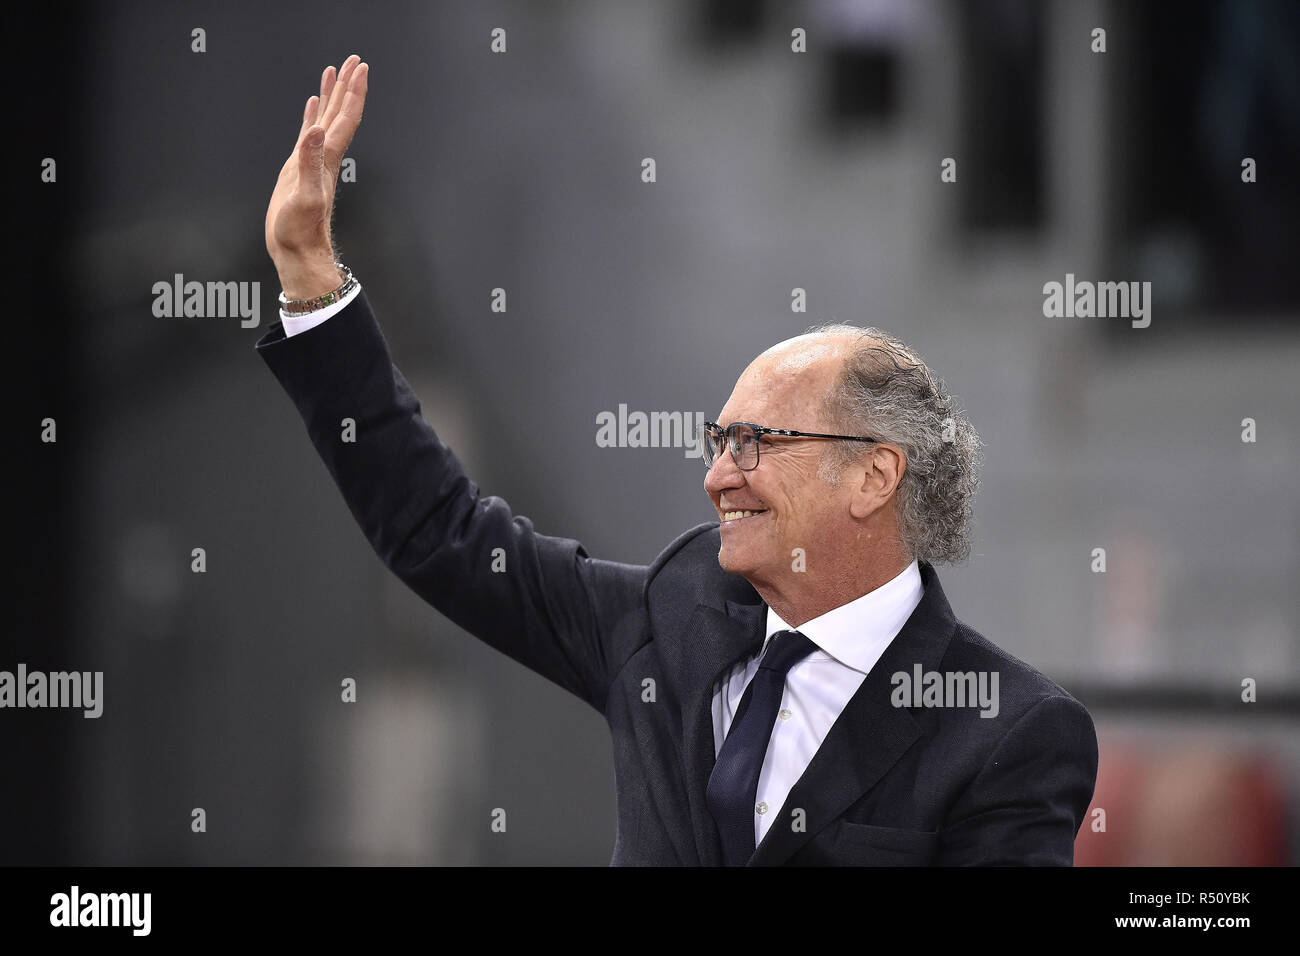 Rome, Italy. 27th Nov, 2018. AS Roma former player Paulo Roberto Falcao before the UEFA Champions League match between Roma and Real Madrid at Stadio Olimpico, Rome, Italy on 27 November 2018. Credit: Giuseppe Maffia/Pacific Press/Alamy Live News Stock Photo